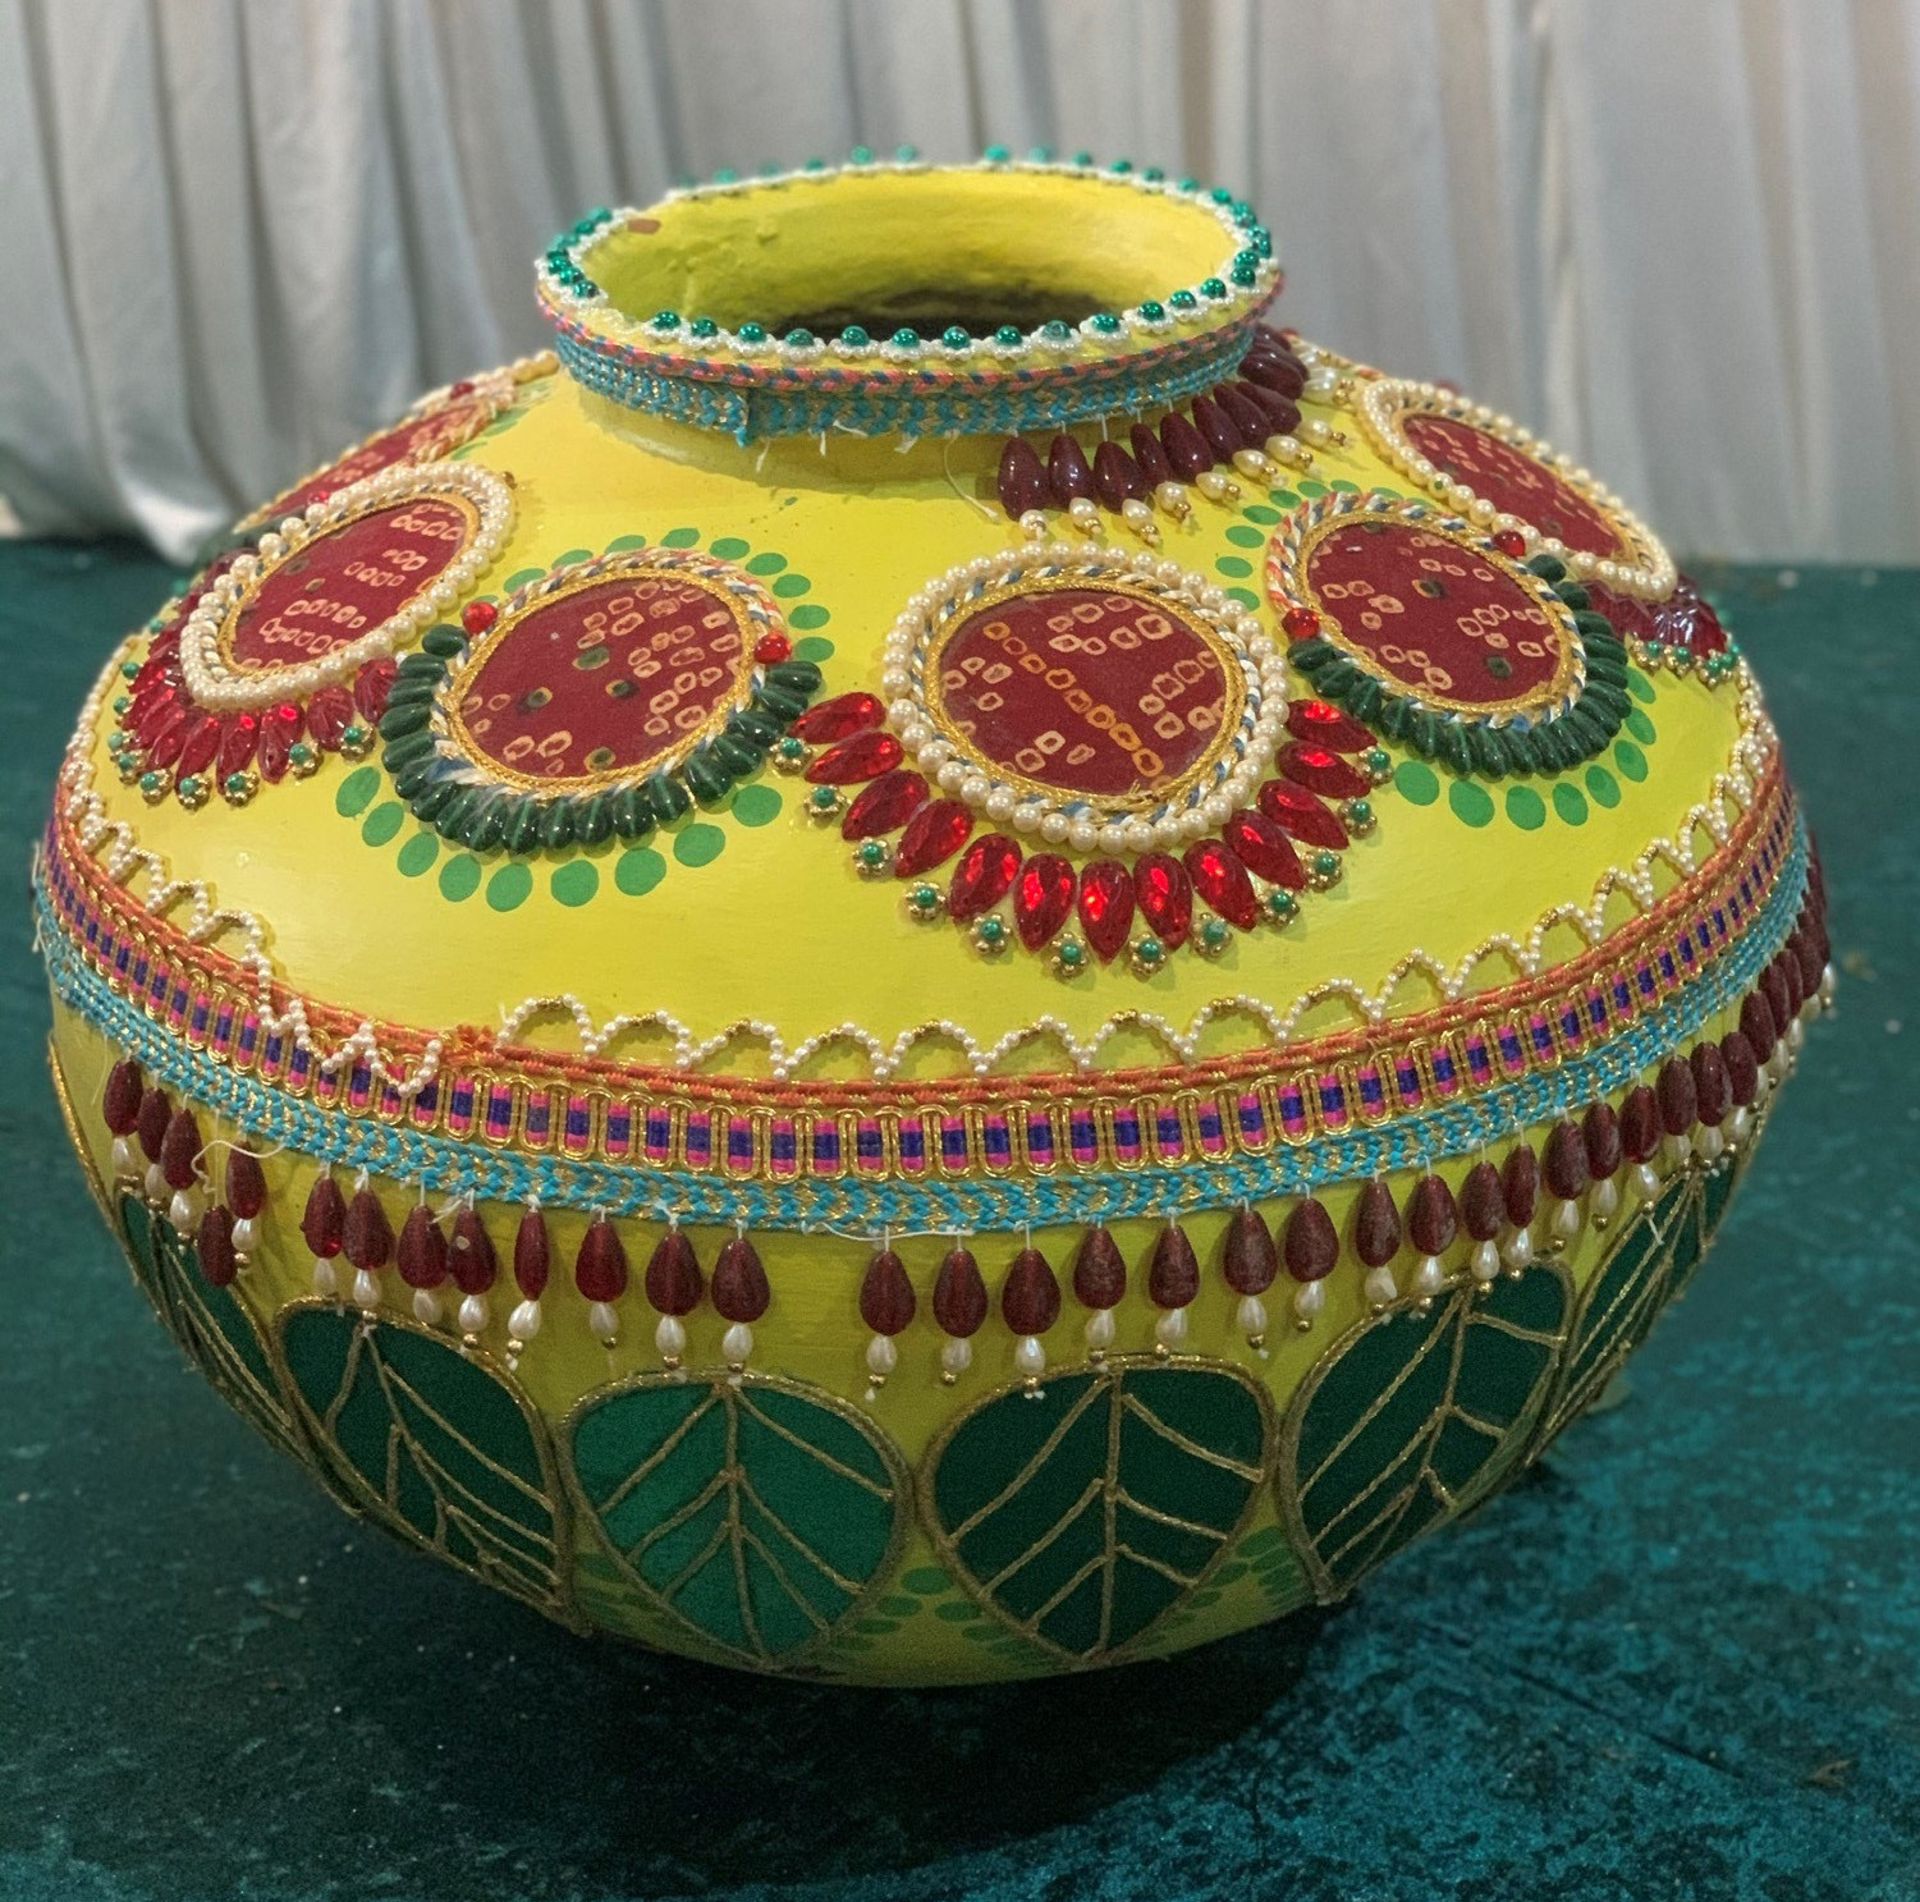 1 x Large Decorated Yellow Indian Pot - Dimensions: 40x50cm - Ref: Lot 104 - CL548 - Location: